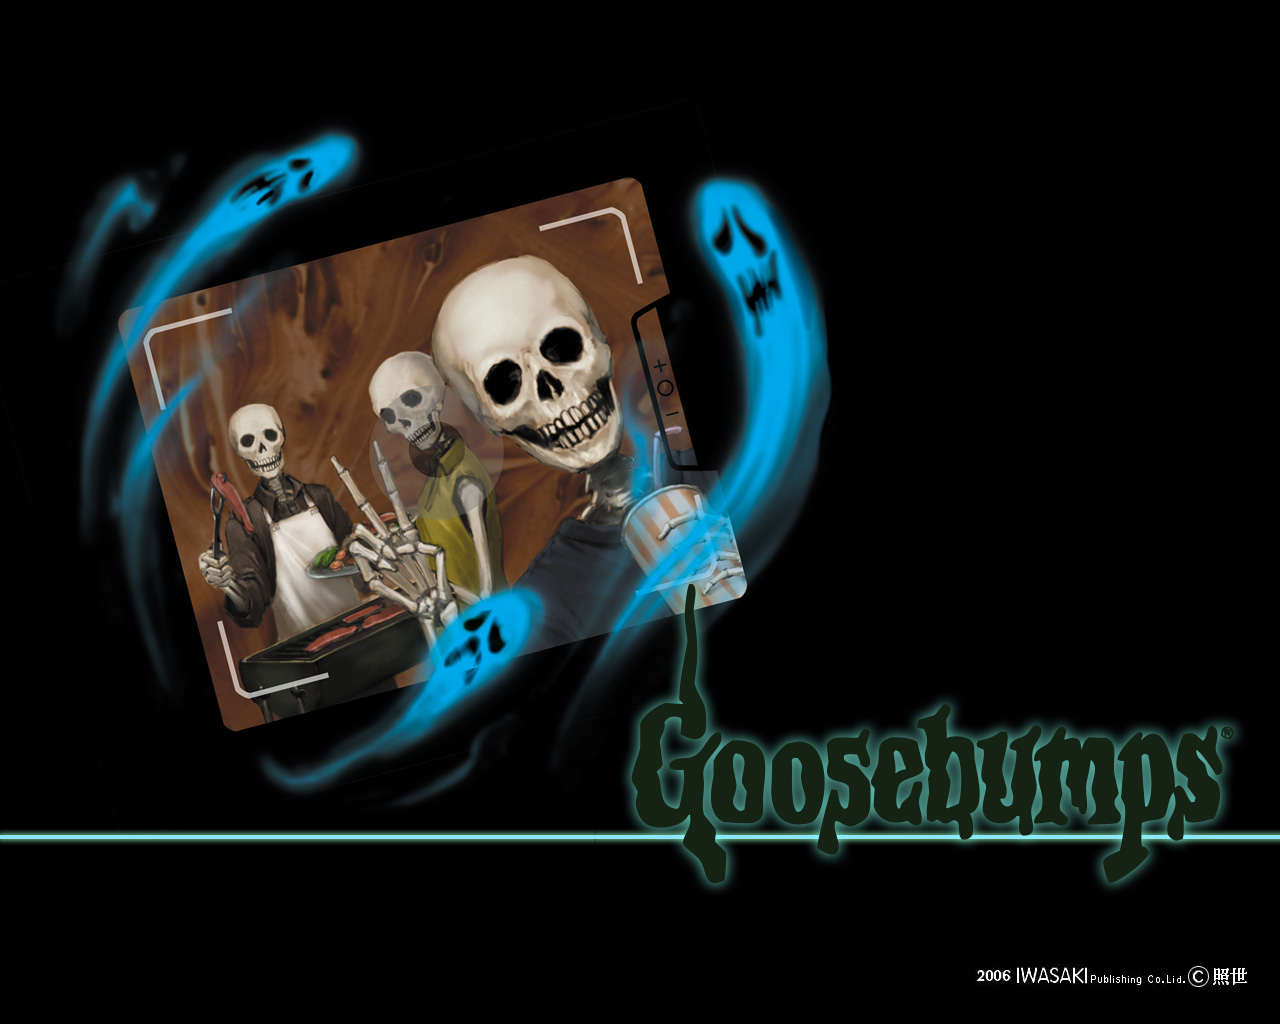 Goosebumps Wallpaper And Background Image - Goosebumps , HD Wallpaper & Backgrounds